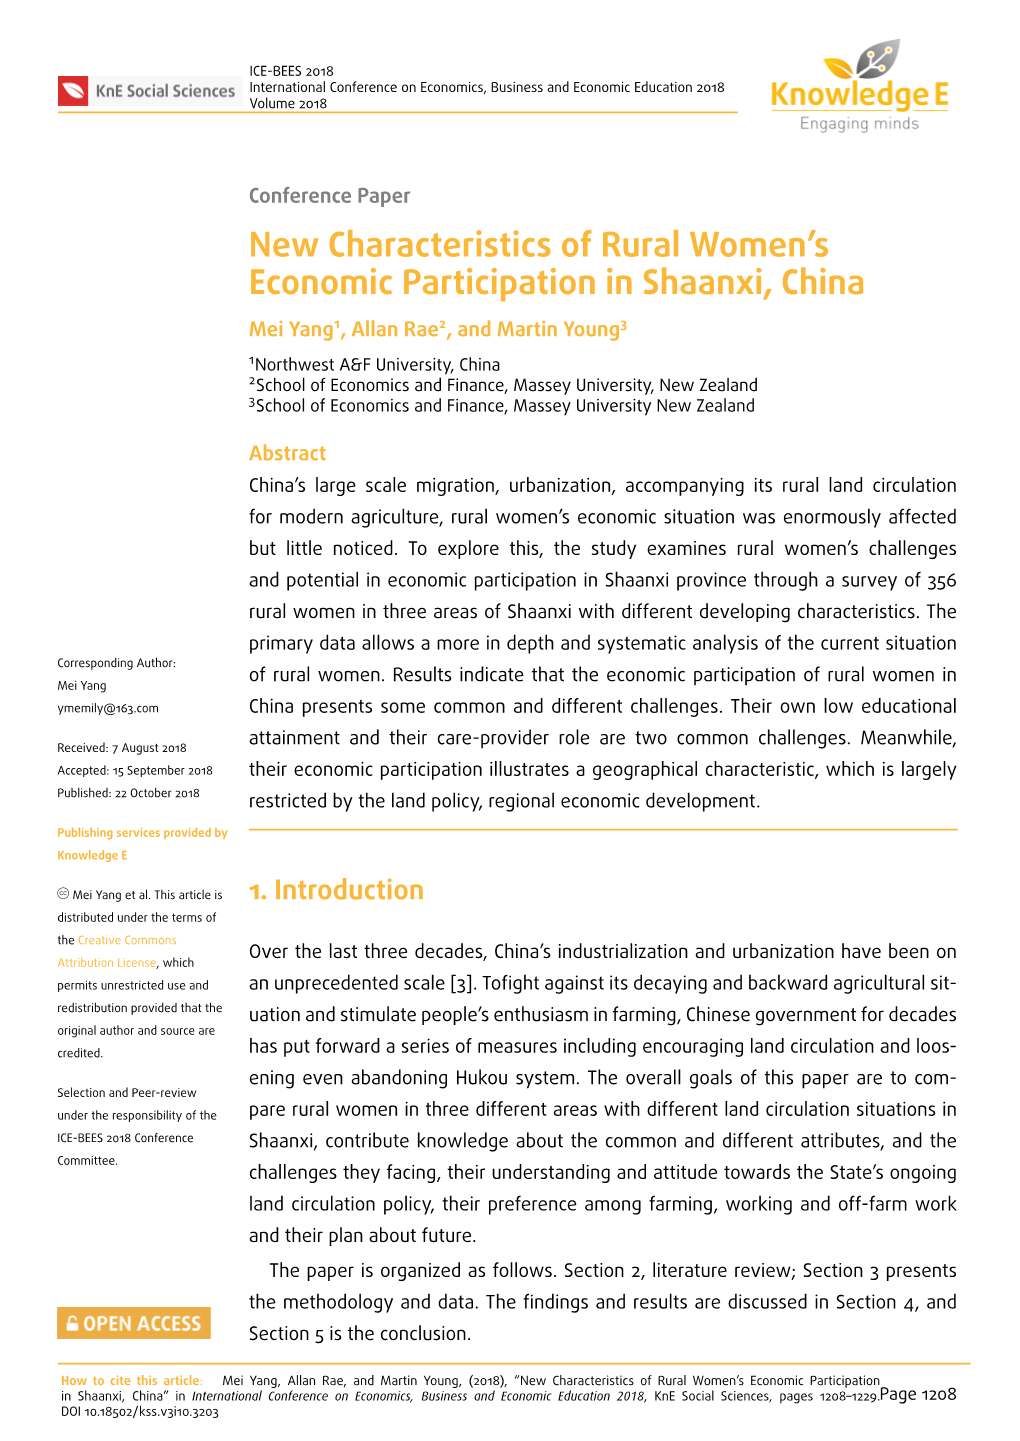 New Characteristics of Rural Women's Economic Participation in Shaanxi